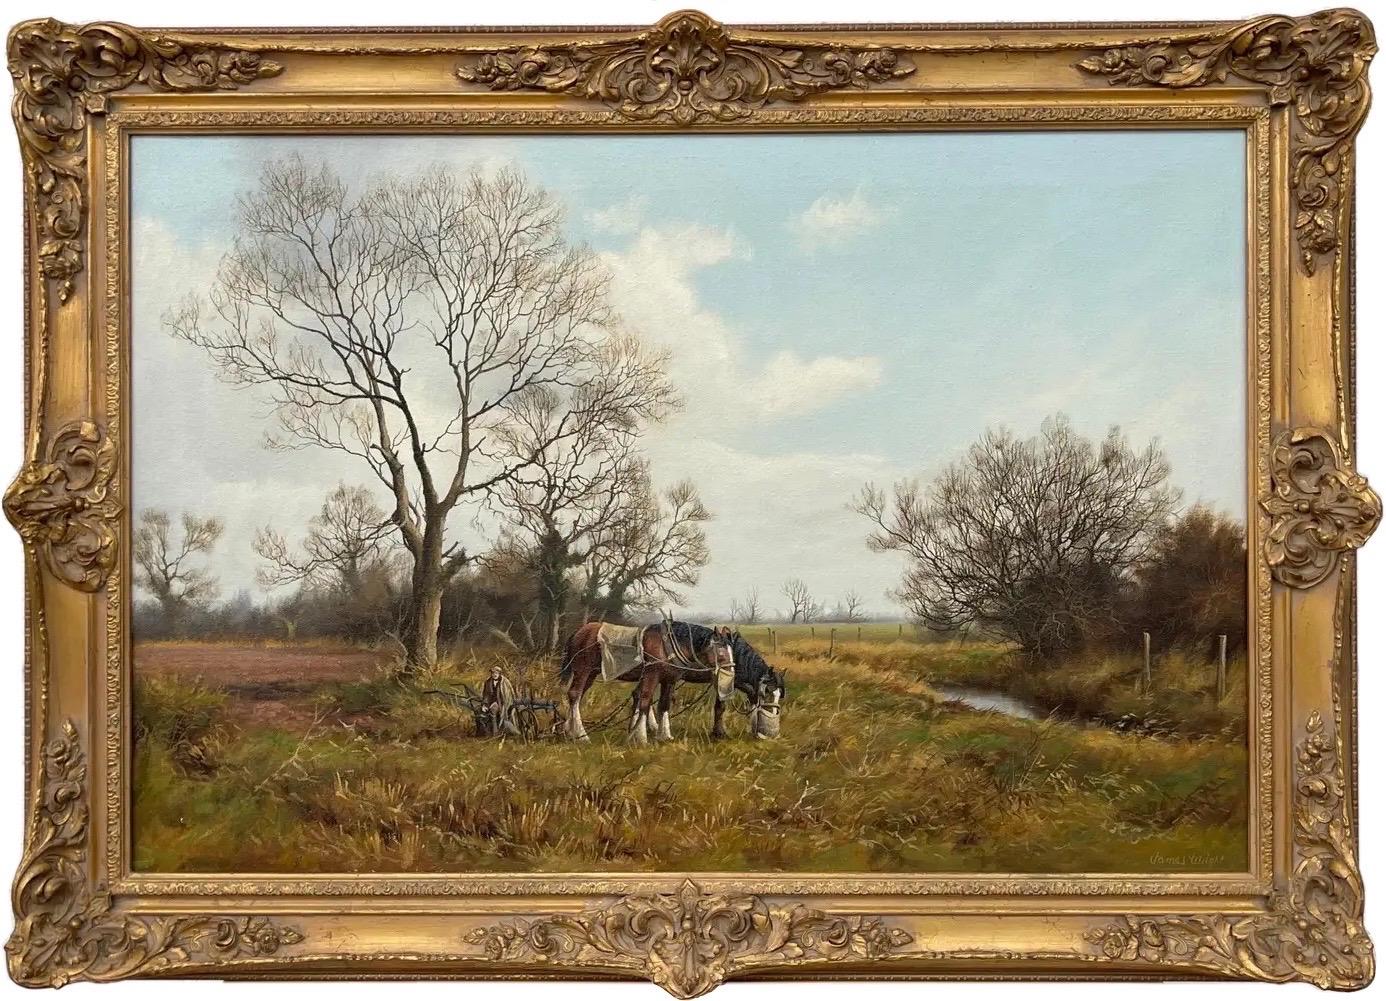 James Wright Animal Painting - Painting of English Countryside with Horses & Plough by Modern British Artist